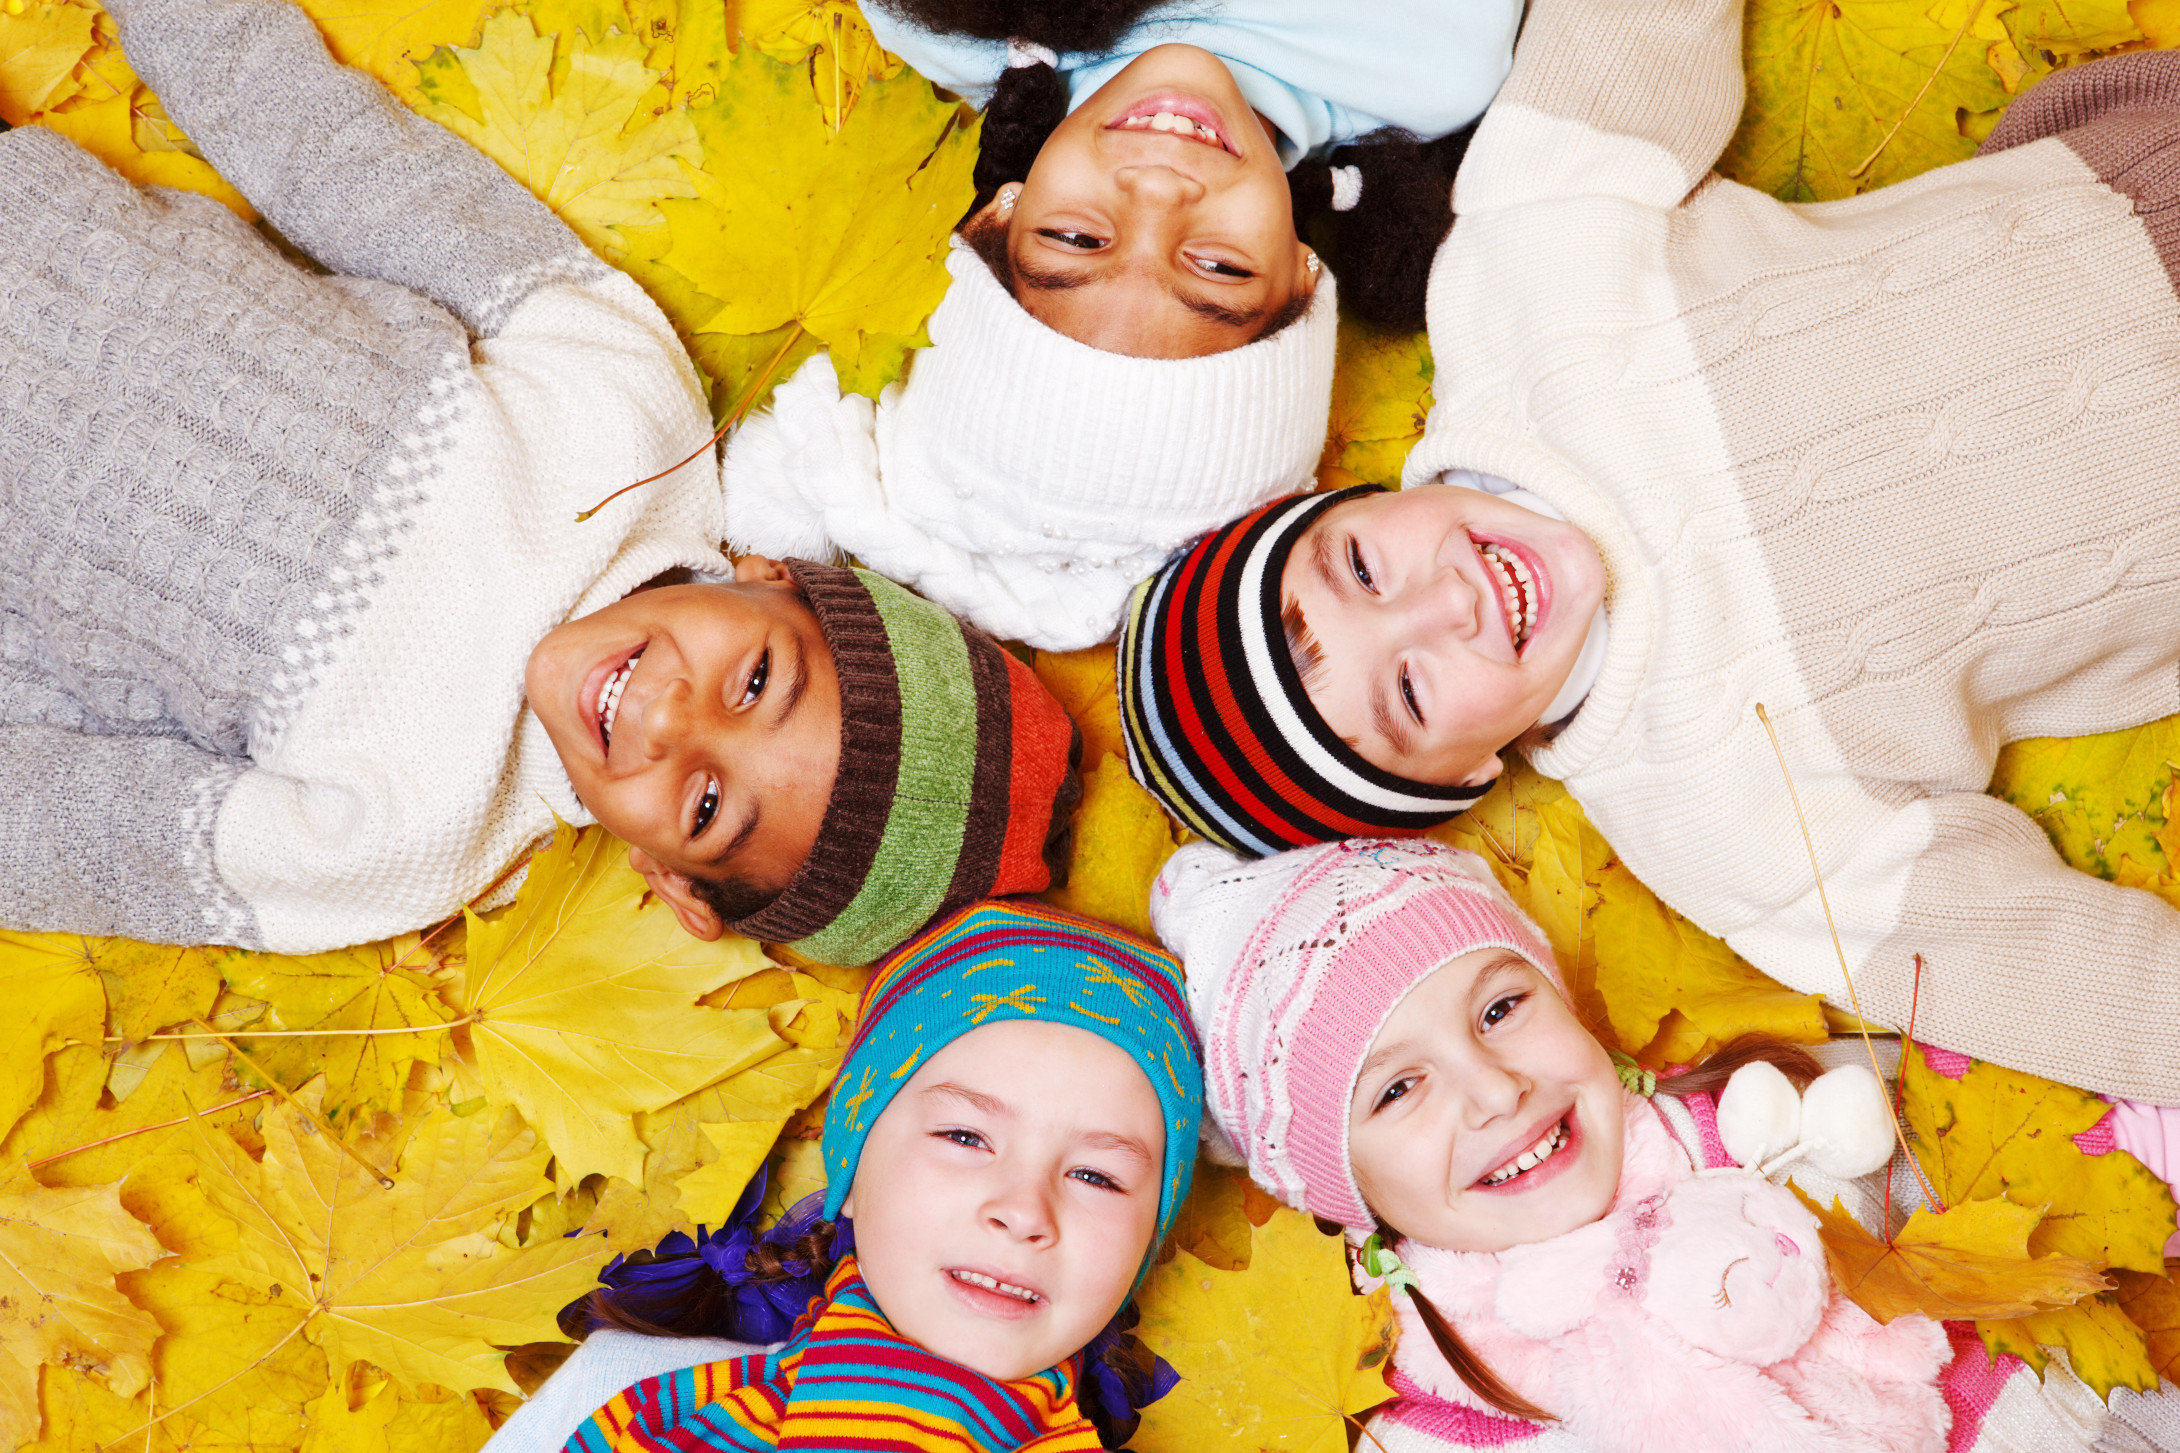 A group of smiling children on autumnal leaves.